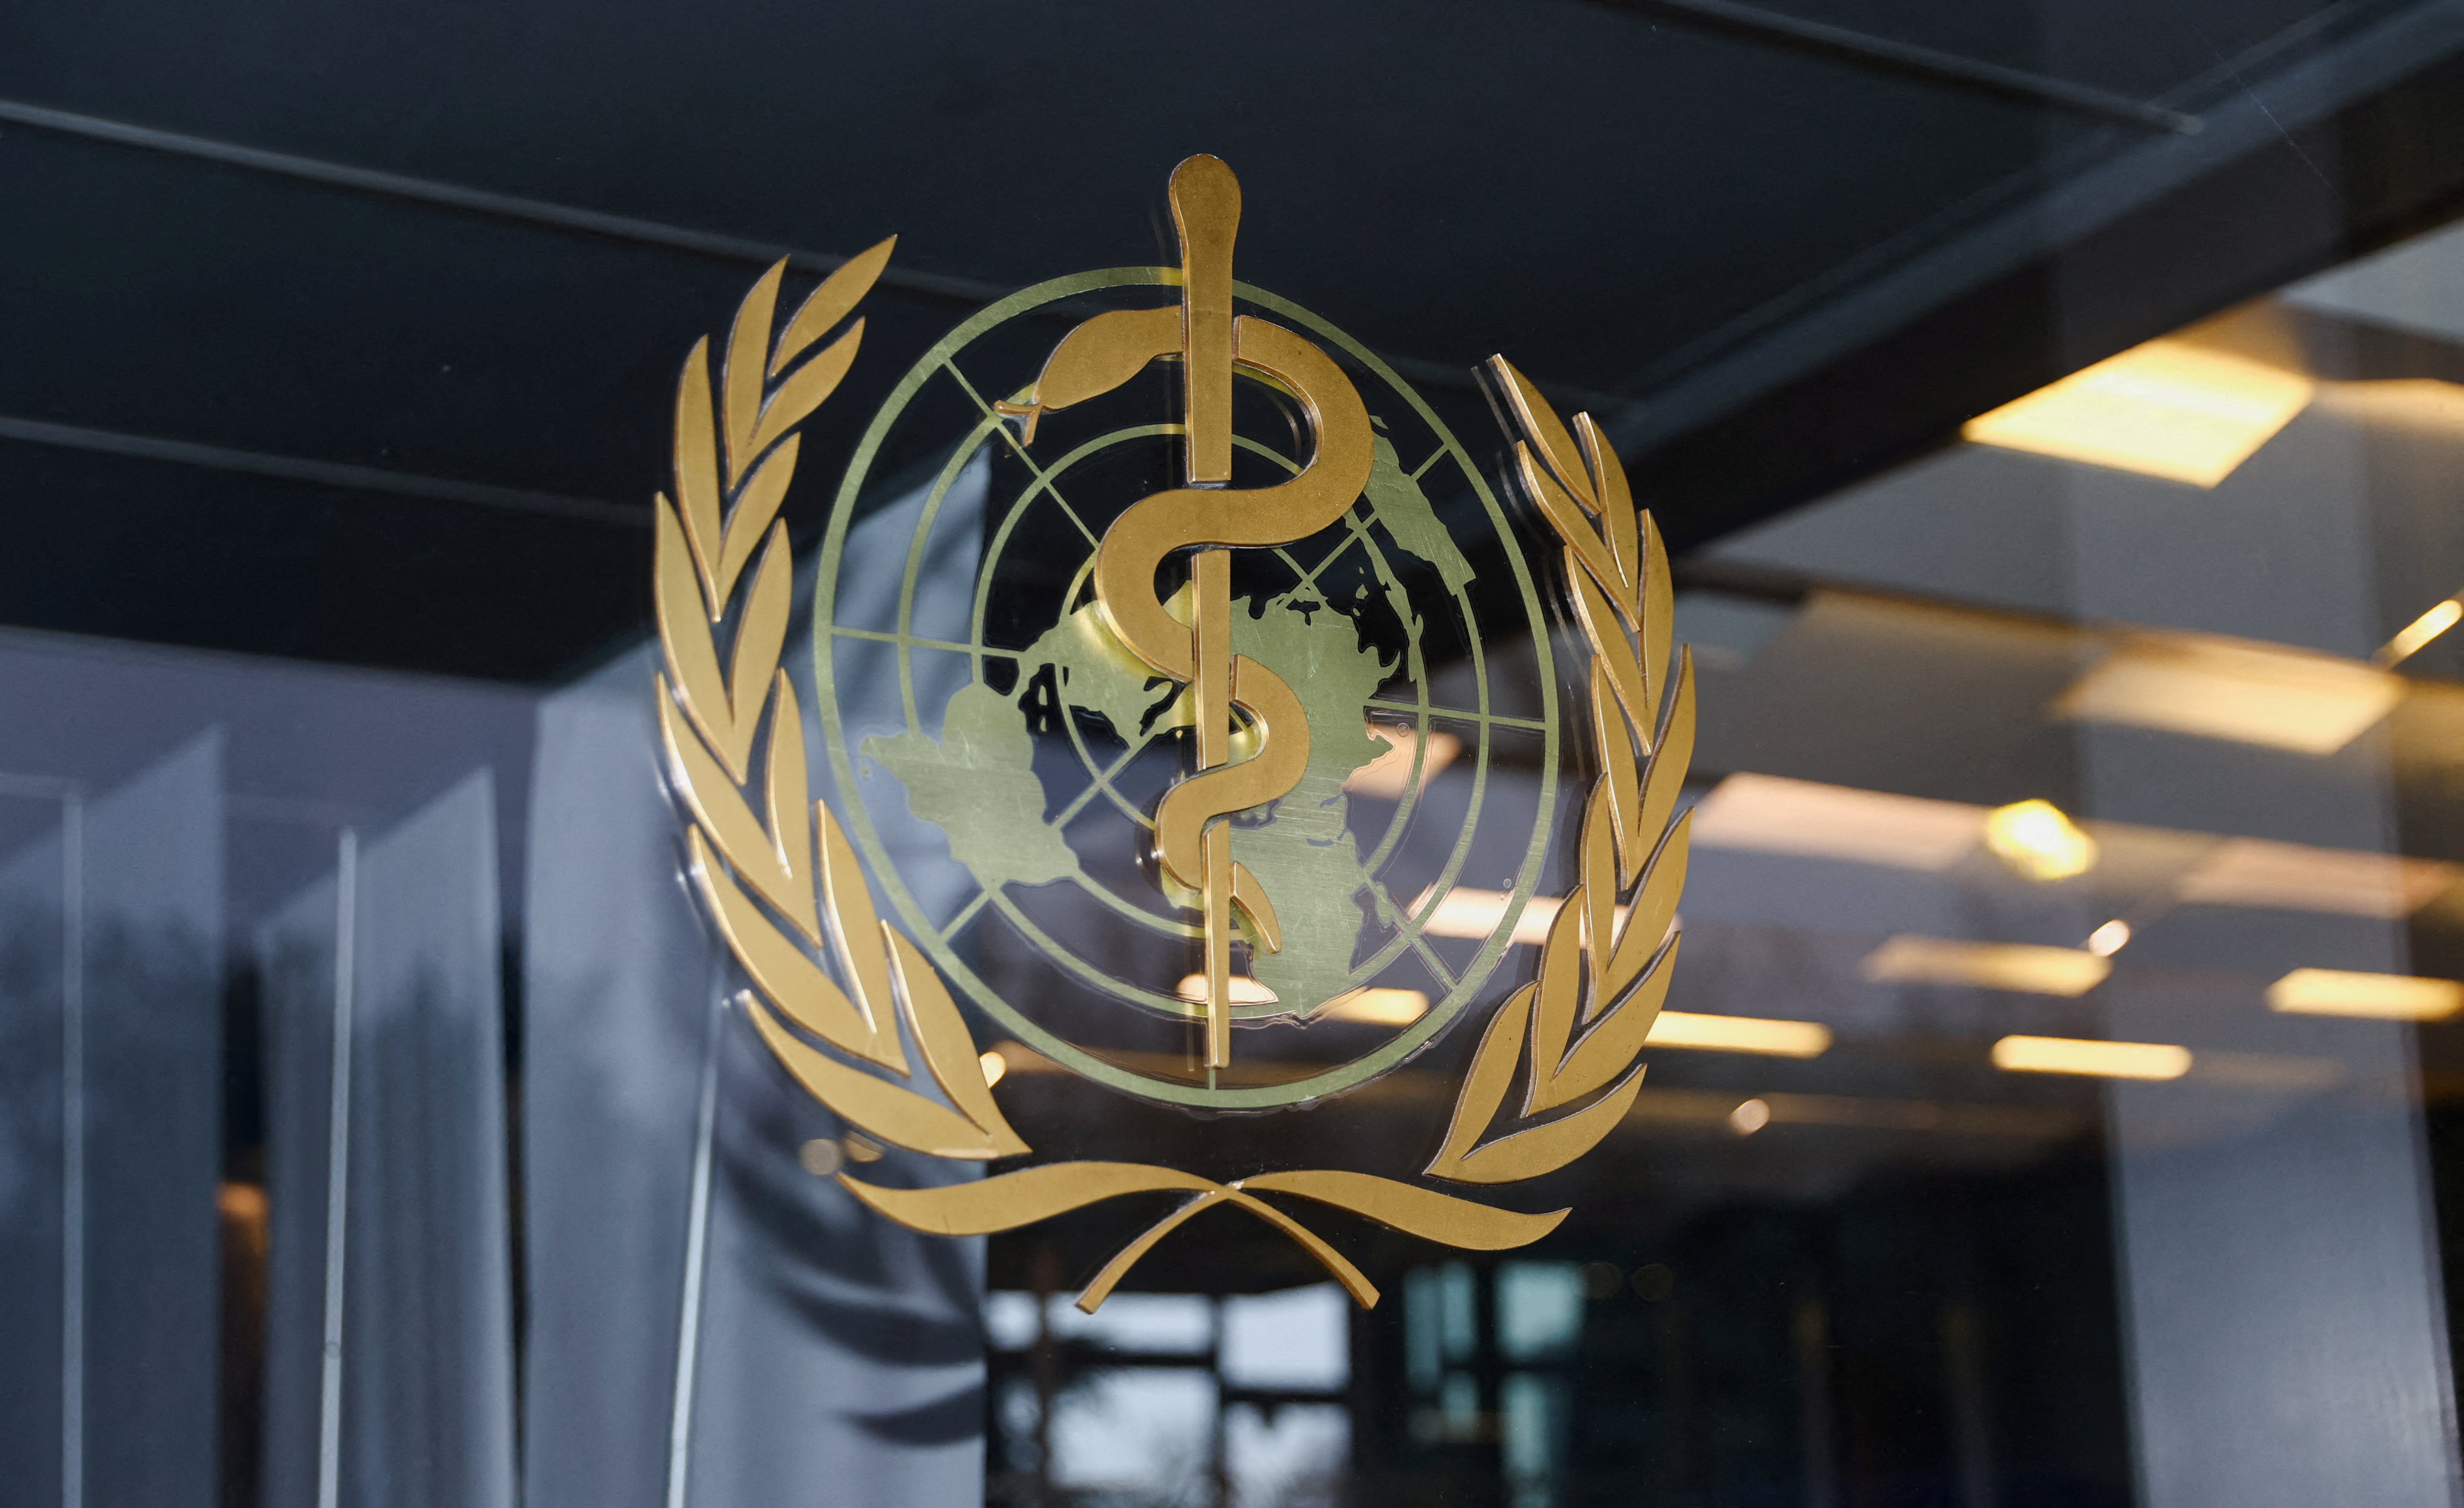 The World Health Organization logo is pictured at the entrance of the WHO building, in Geneva, Switzerland, December 20, 2021. REUTERS/Denis Balibouse